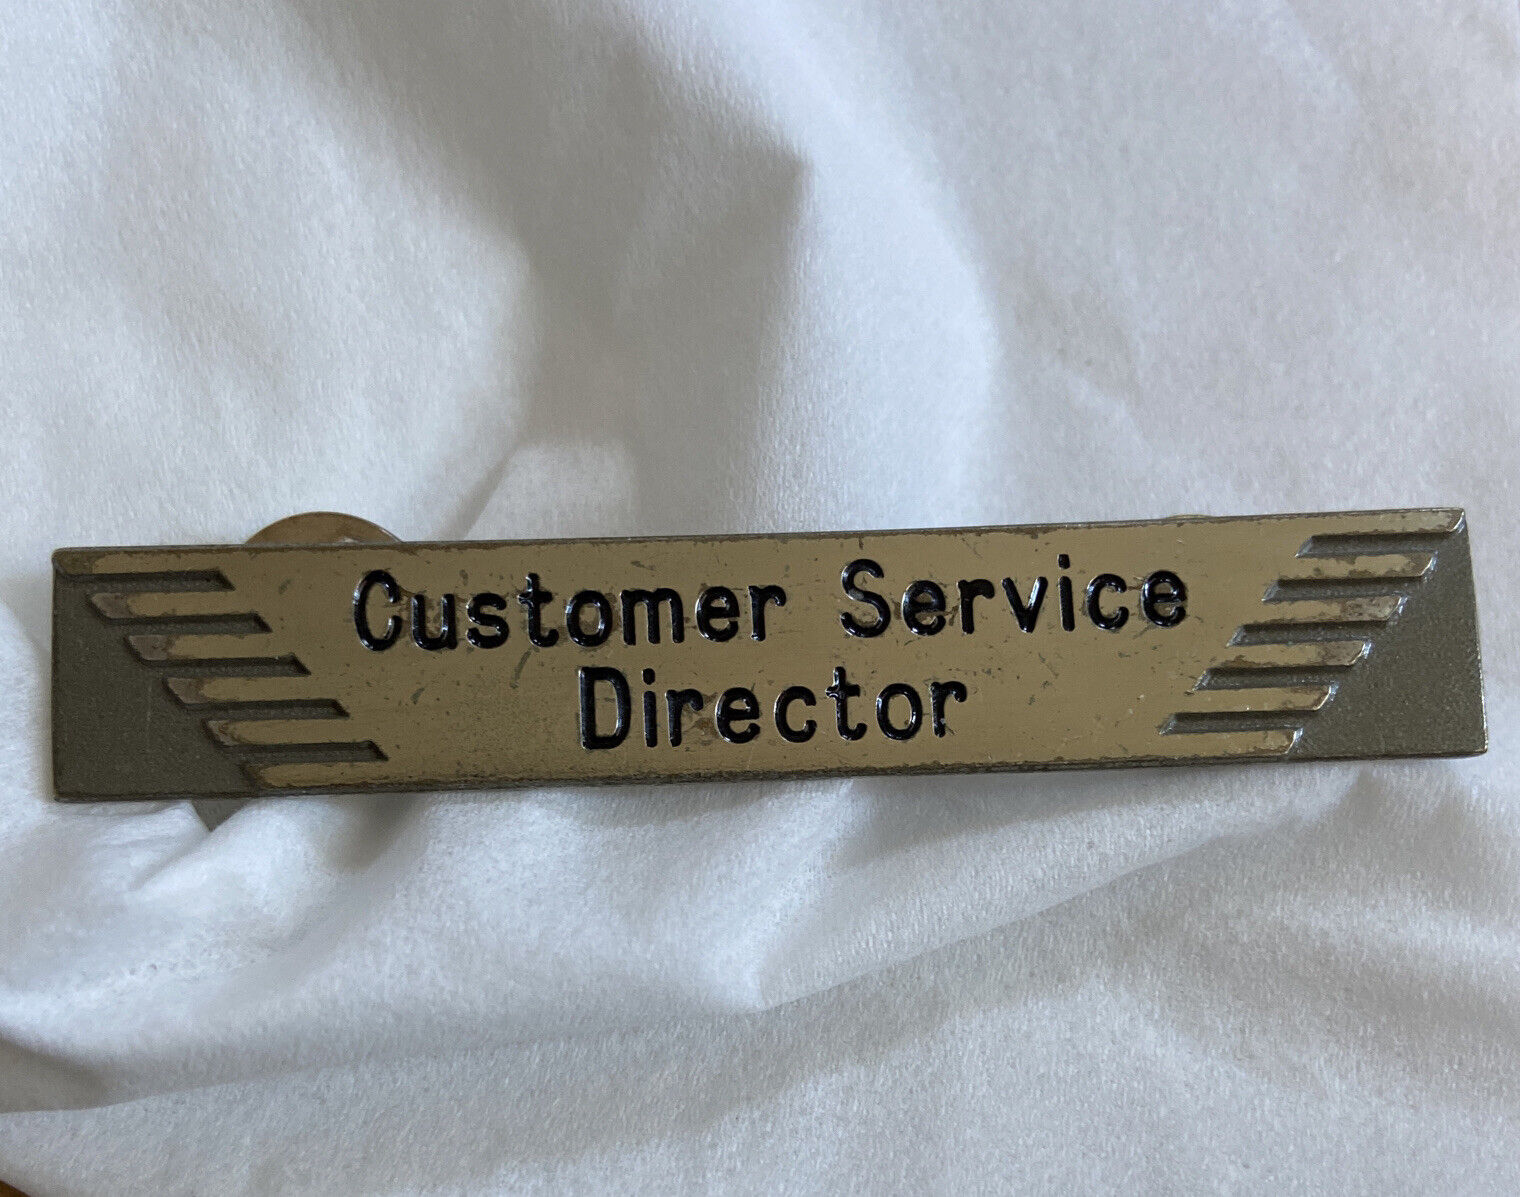 Canadian Airlines Customer Service Director Employee Bar Shaped Badge